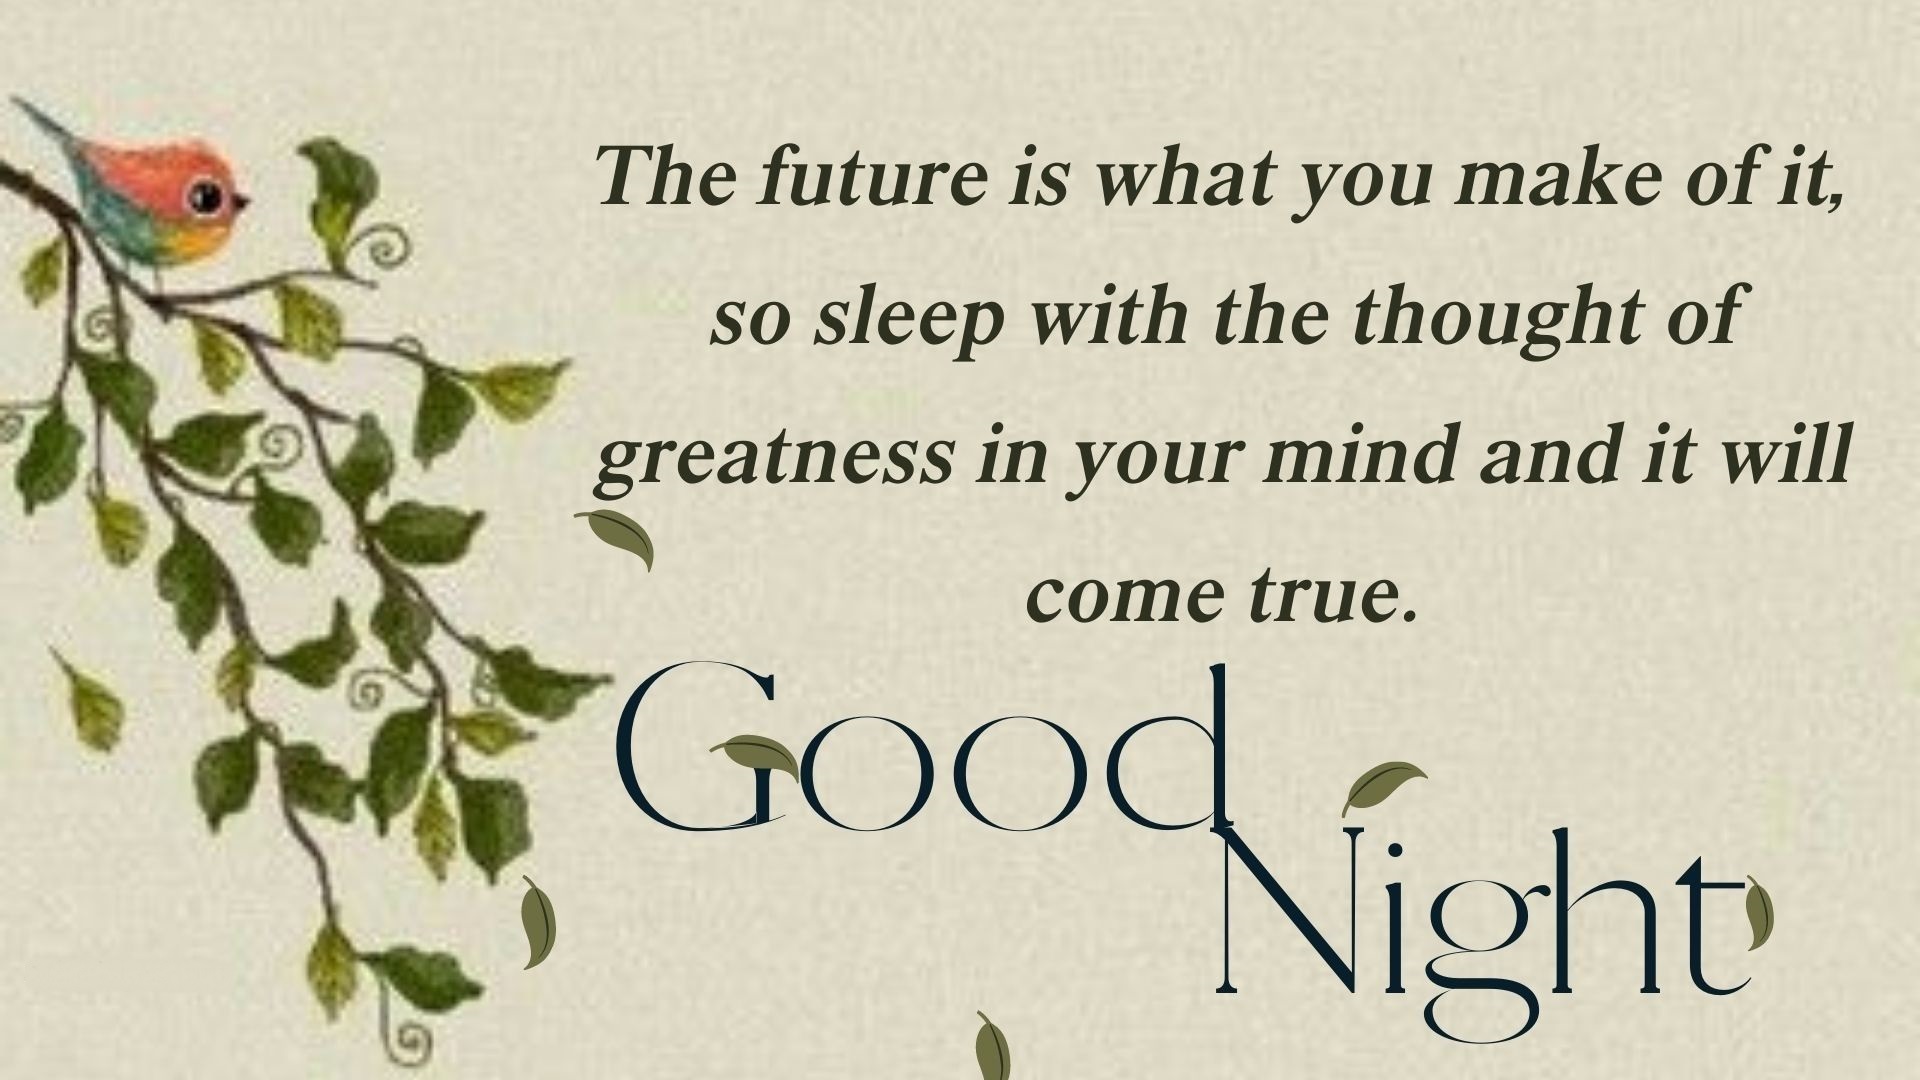 Good Night Motivational and Inspirational Quotes statements will illuminate